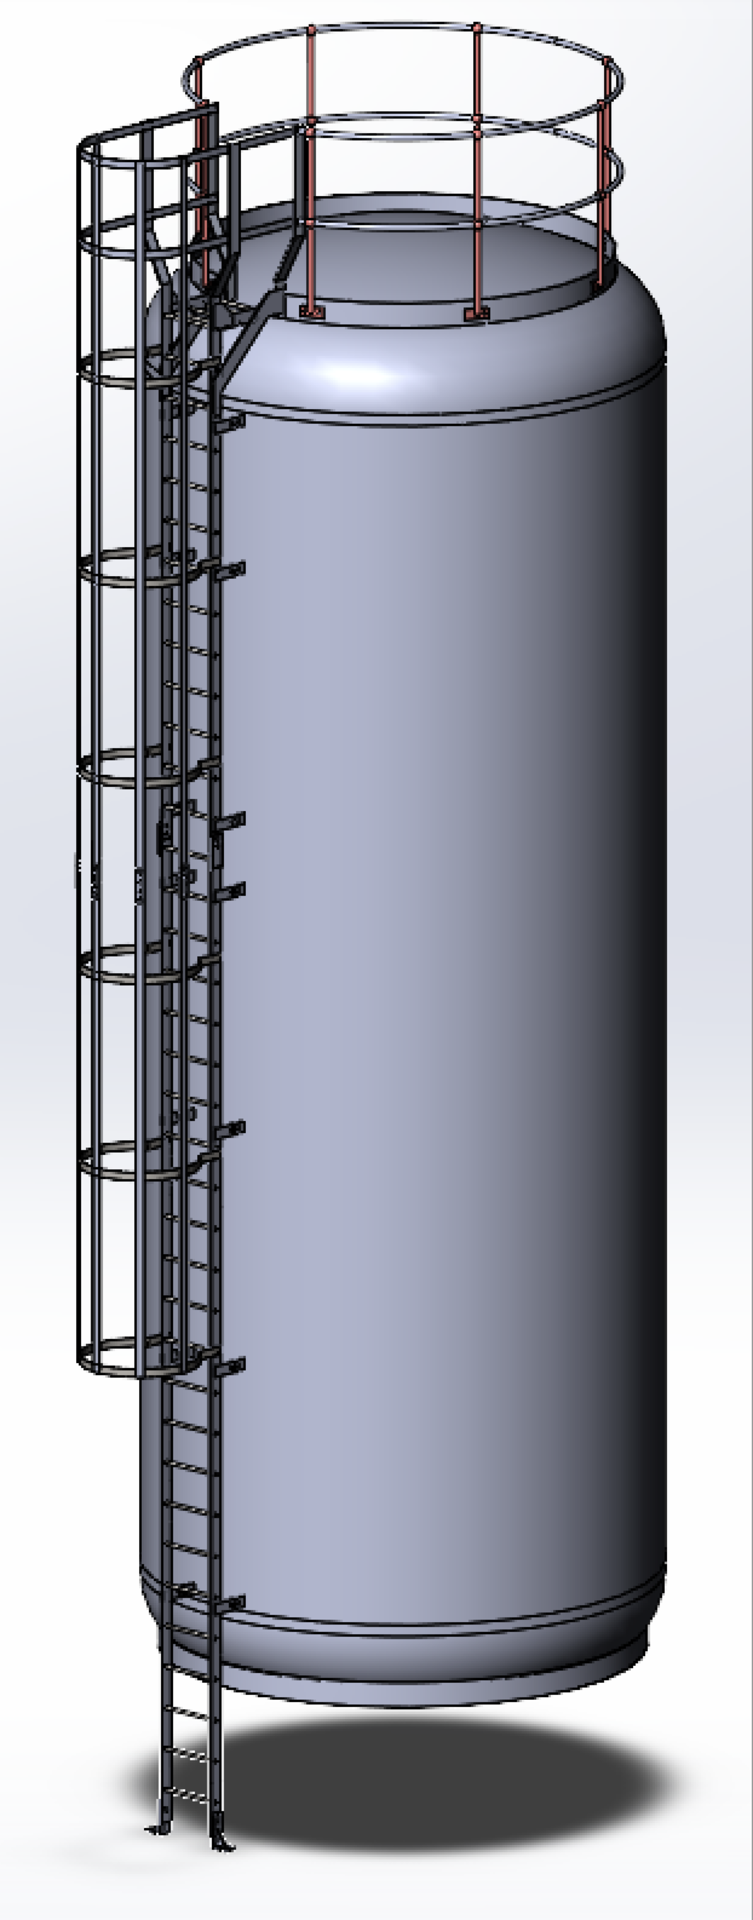 59,000 Litres 1298 Gallon Vertical Stainless Steel 304 Storage Tank with supports & access ladder - Image 3 of 7